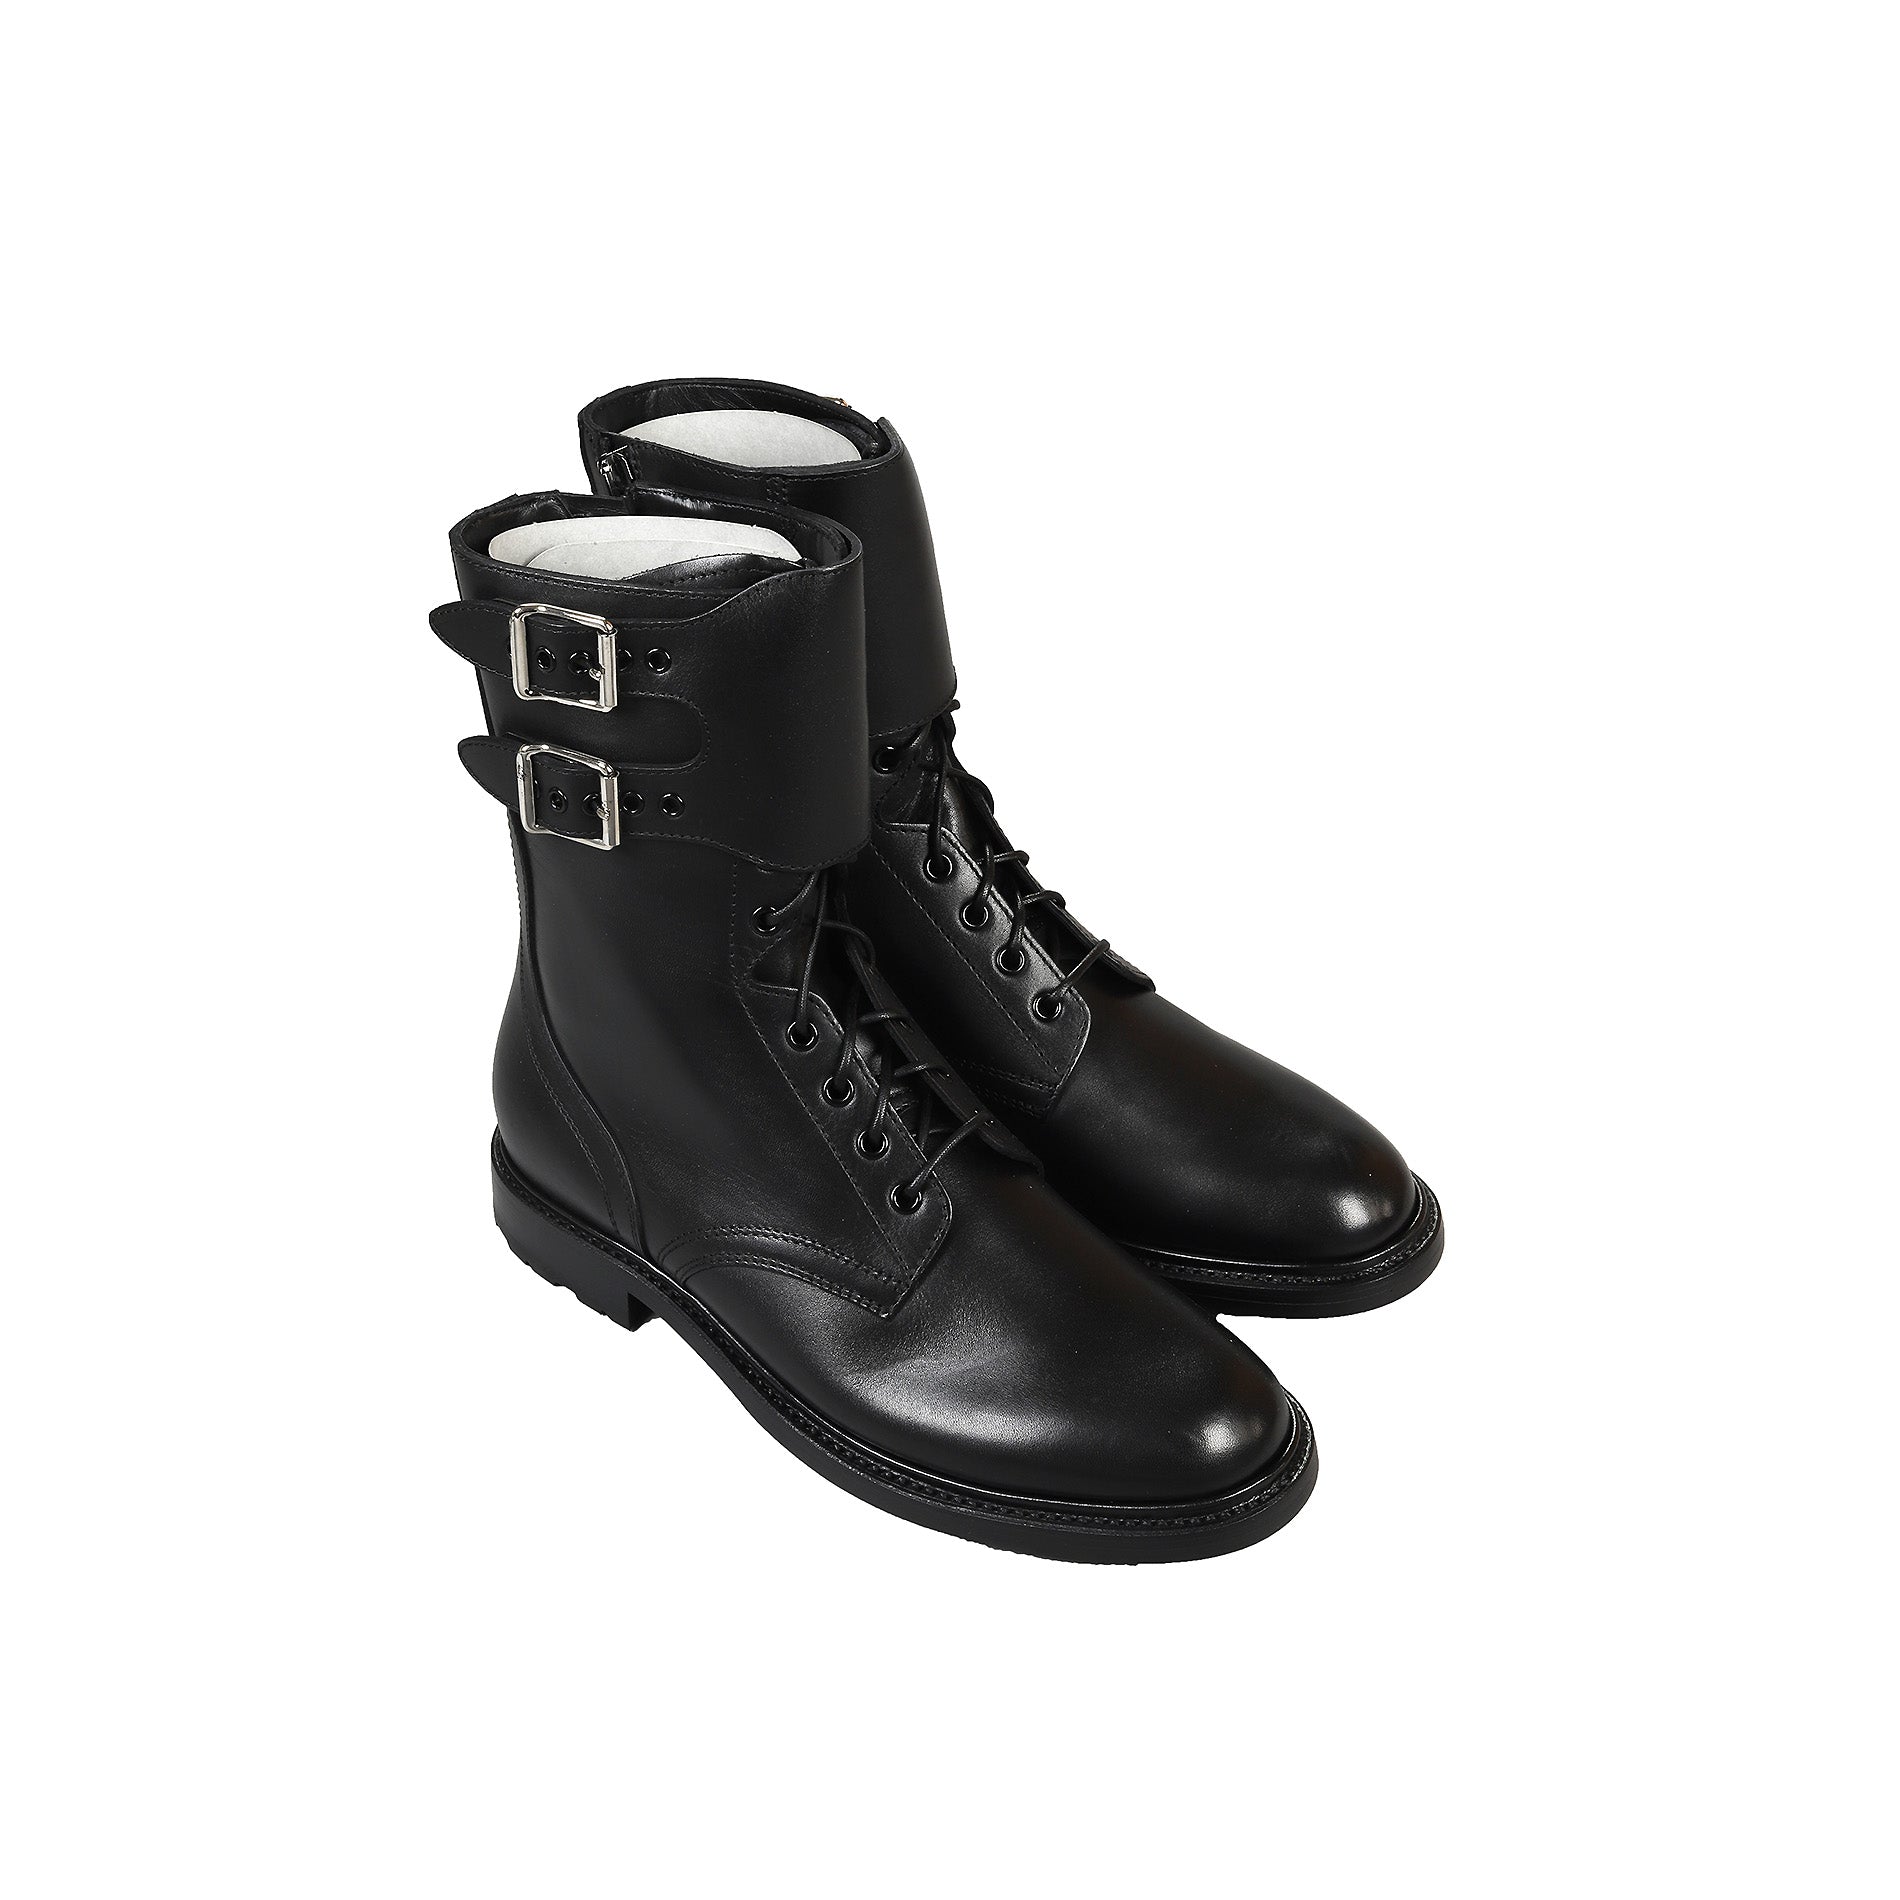 Celine FW2019 Black Military Ranger Calf Leather Buckled Boots